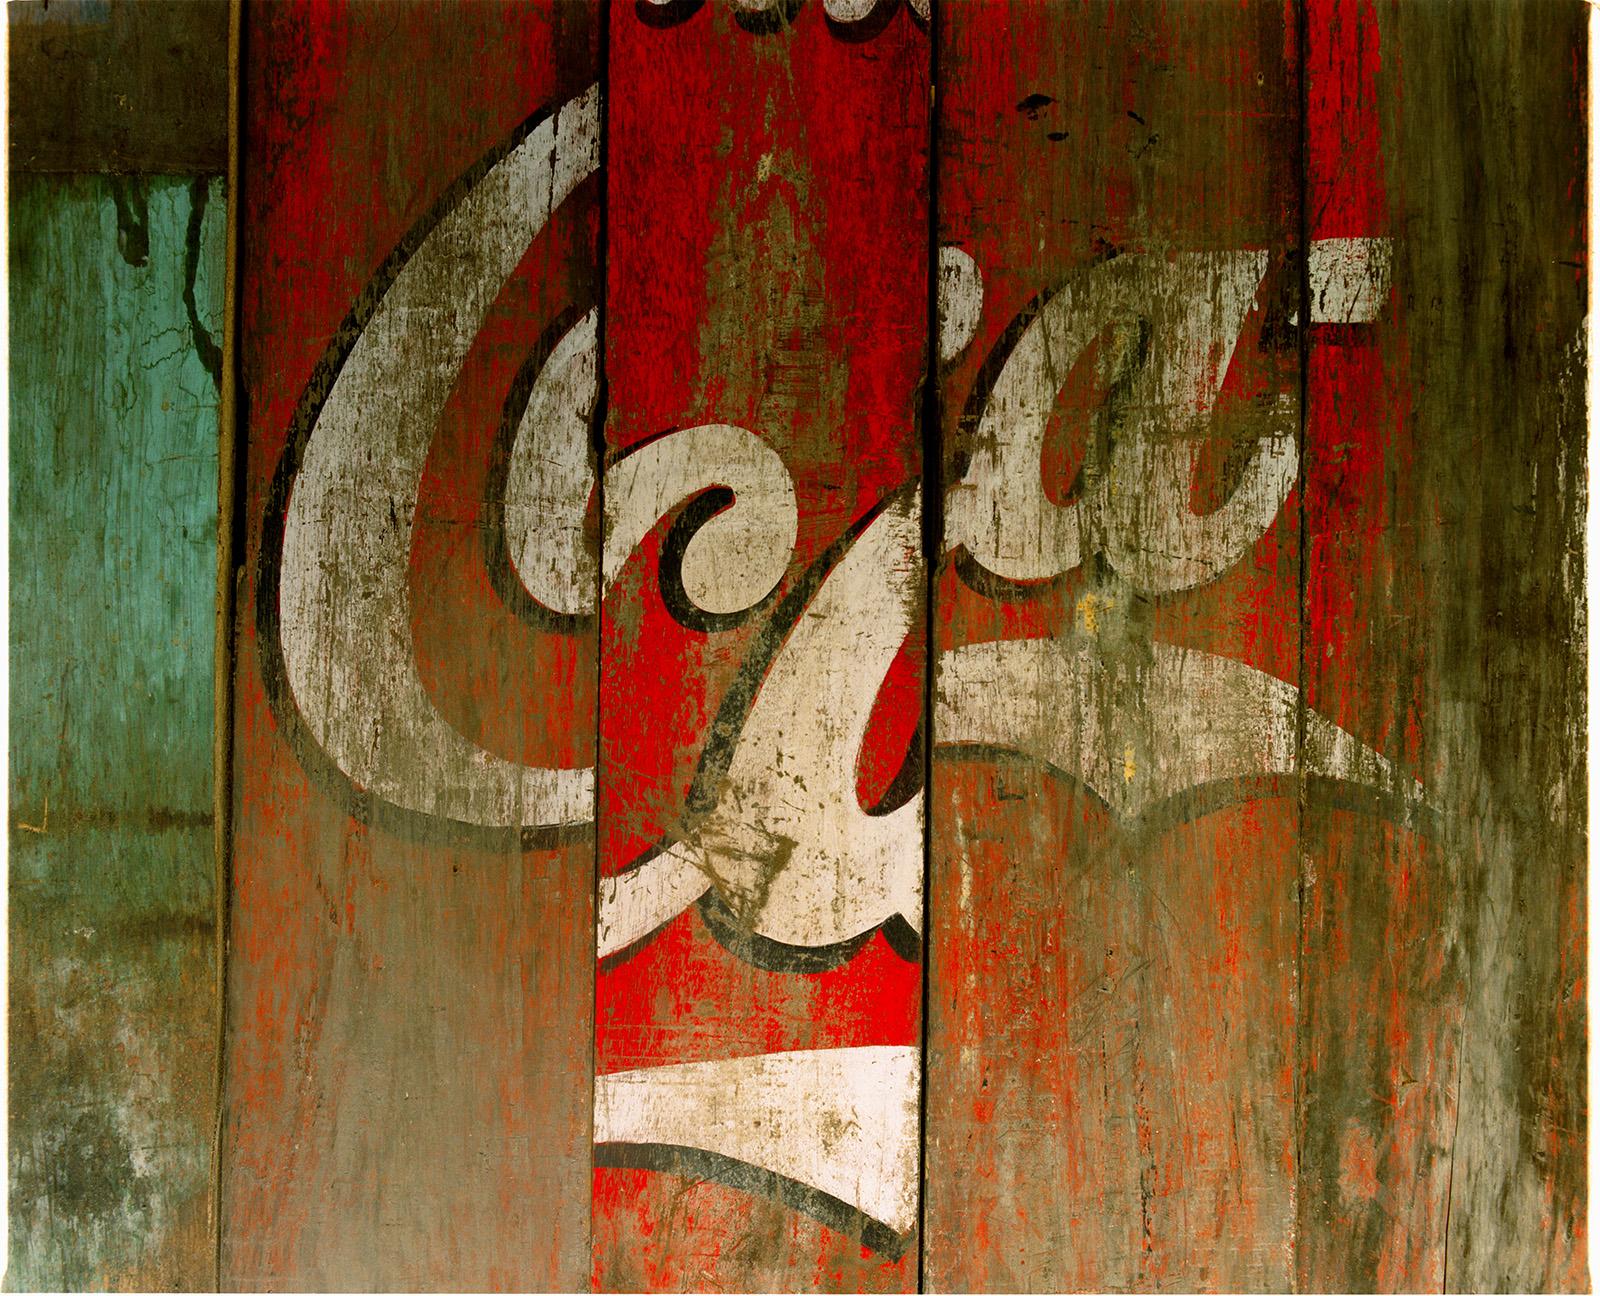 Disjointed Coca-Cola, Darjeeling, West Bengal - Contemporary Color Photography